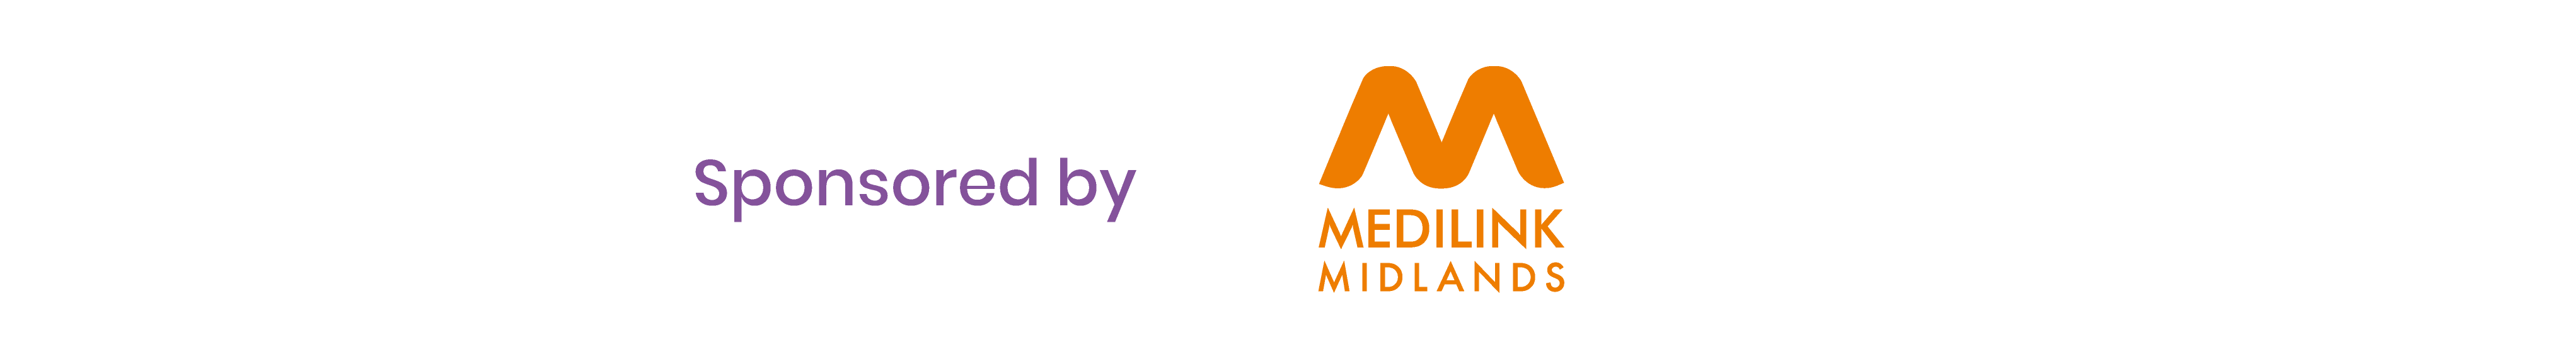 This session was sponsored by Medilink Midlands